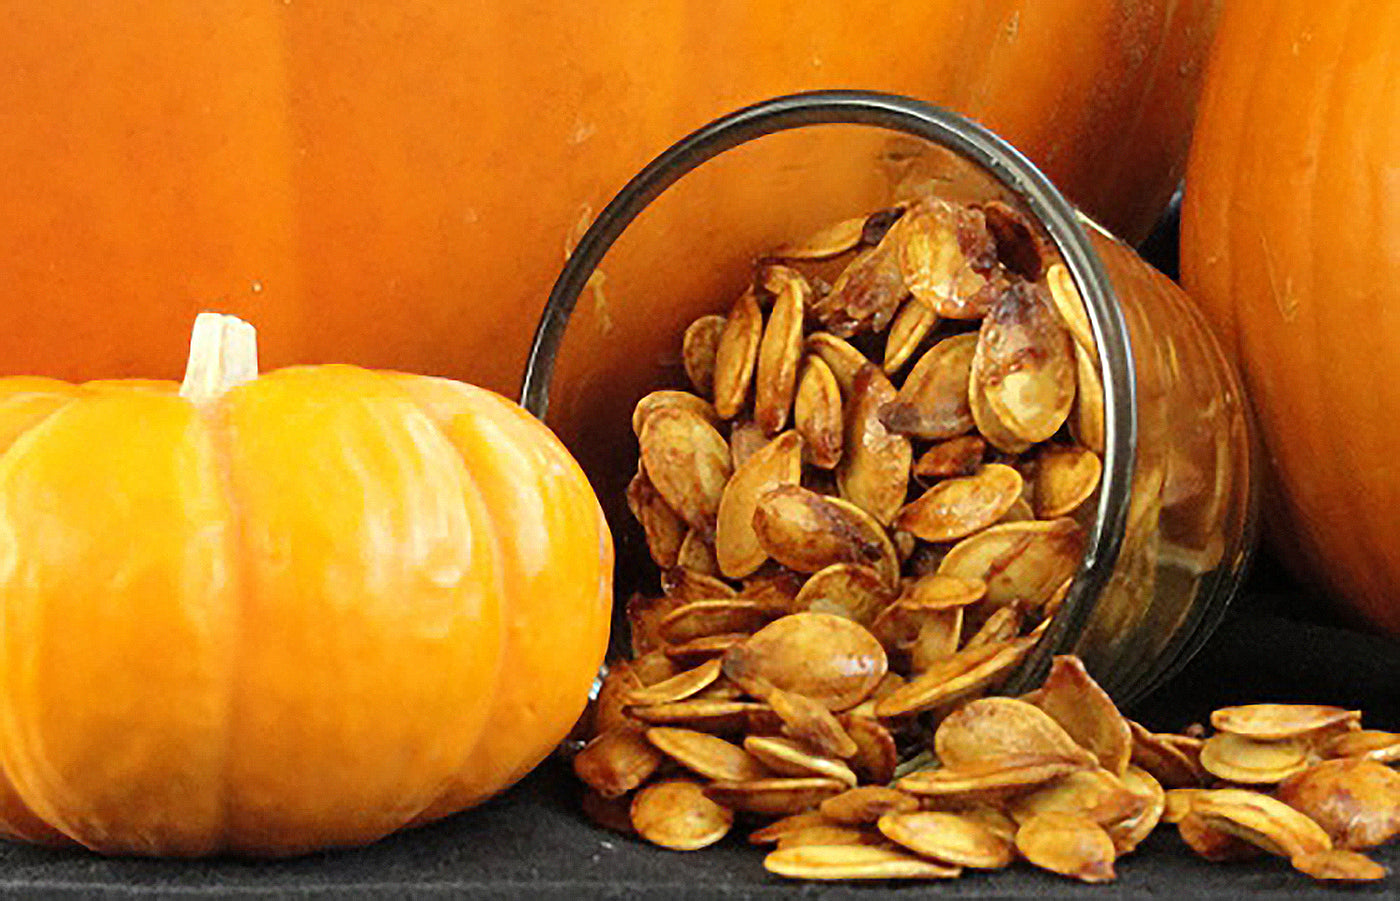 Make it Monday Flavored Roasted Pumpkin Seed Recipes